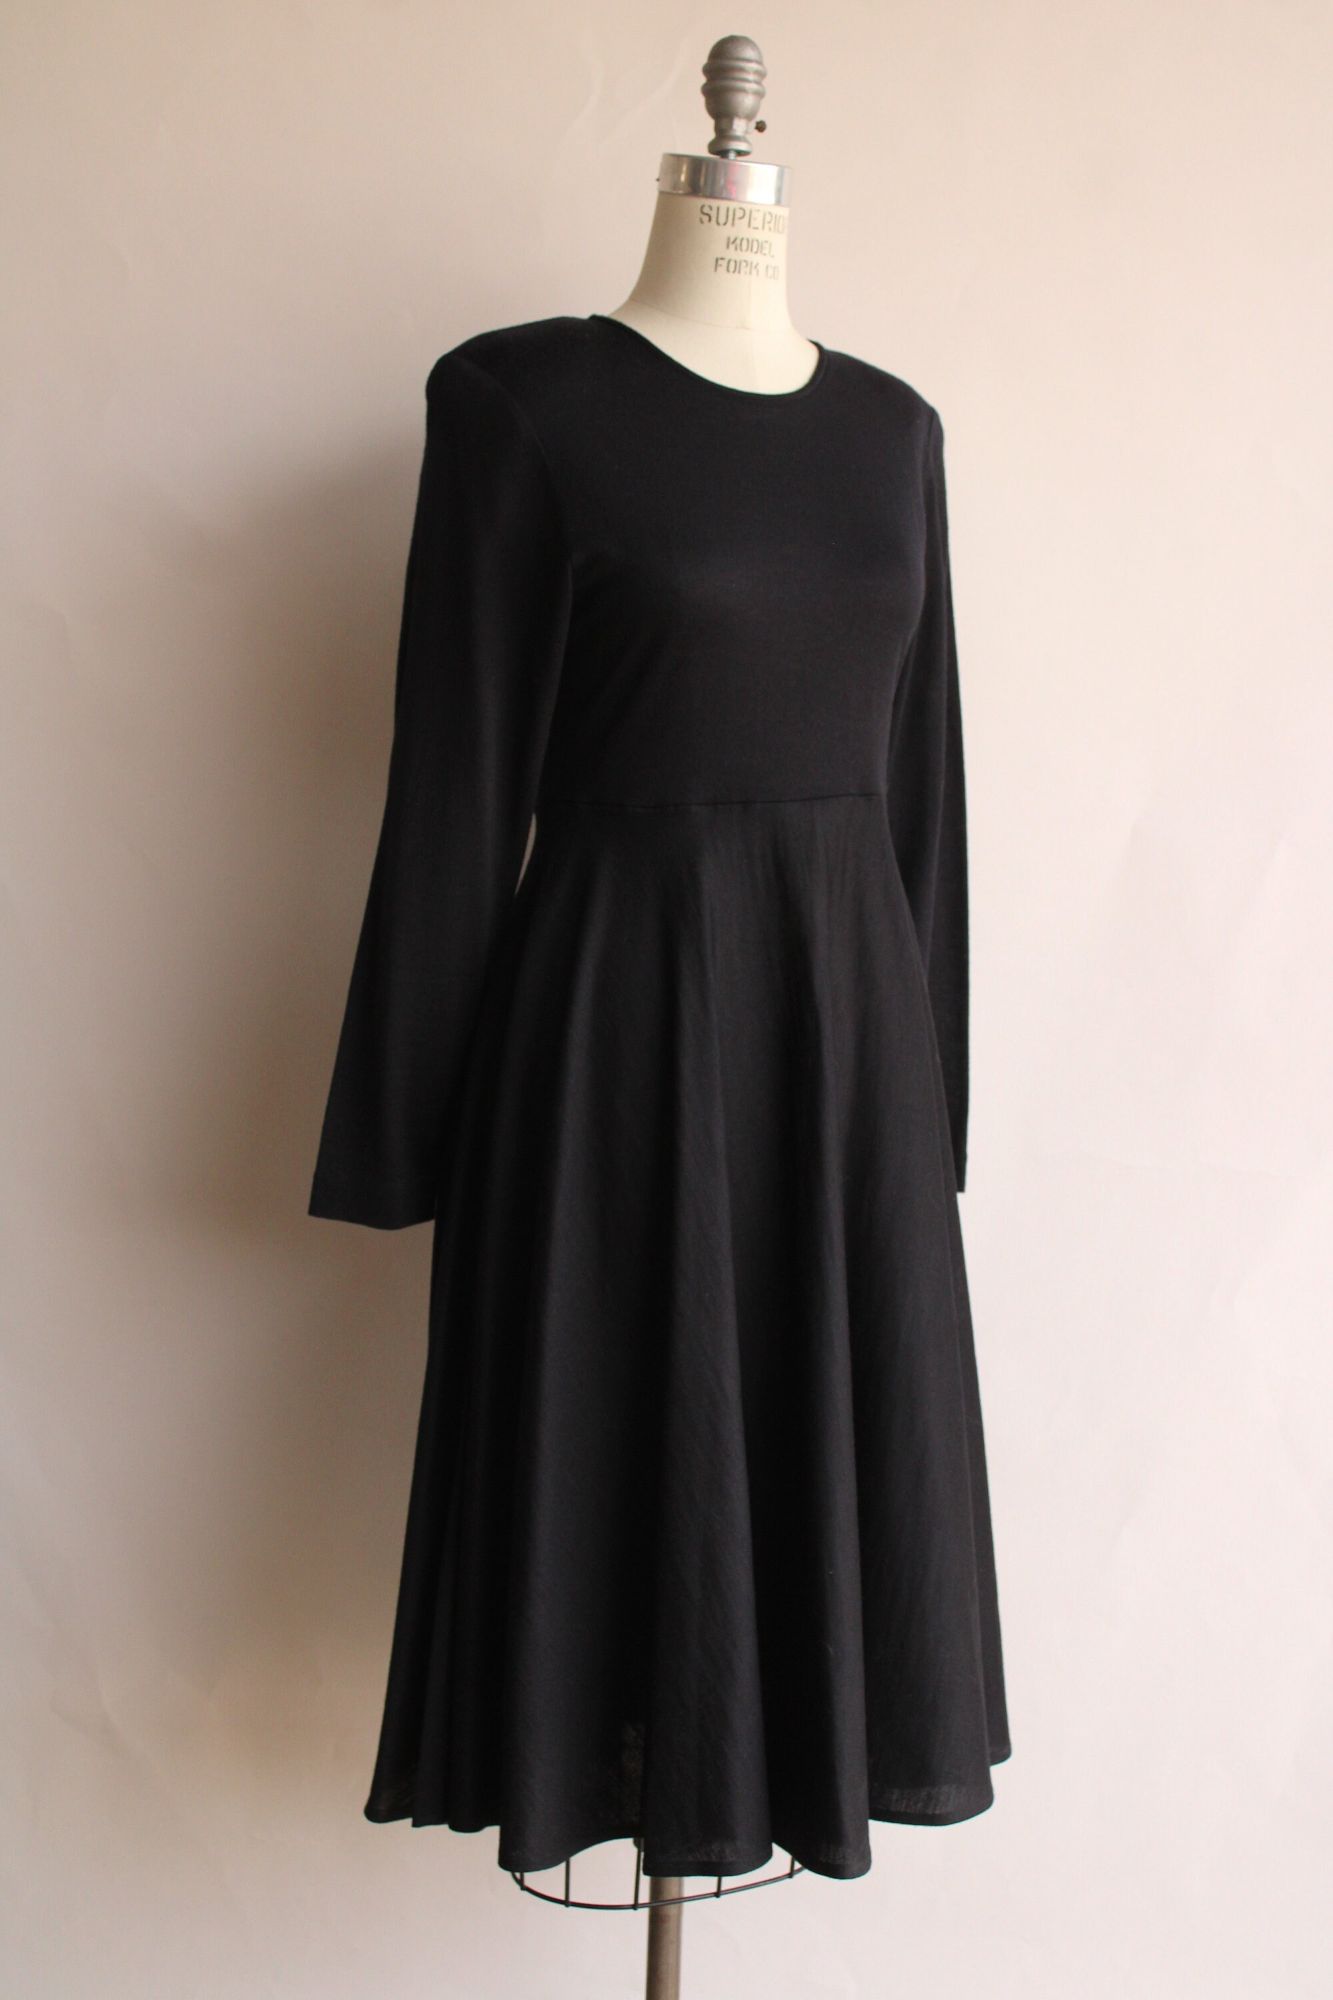 Vintage 1980s Axiom Black Wool Blend Dress with Buttons in Back